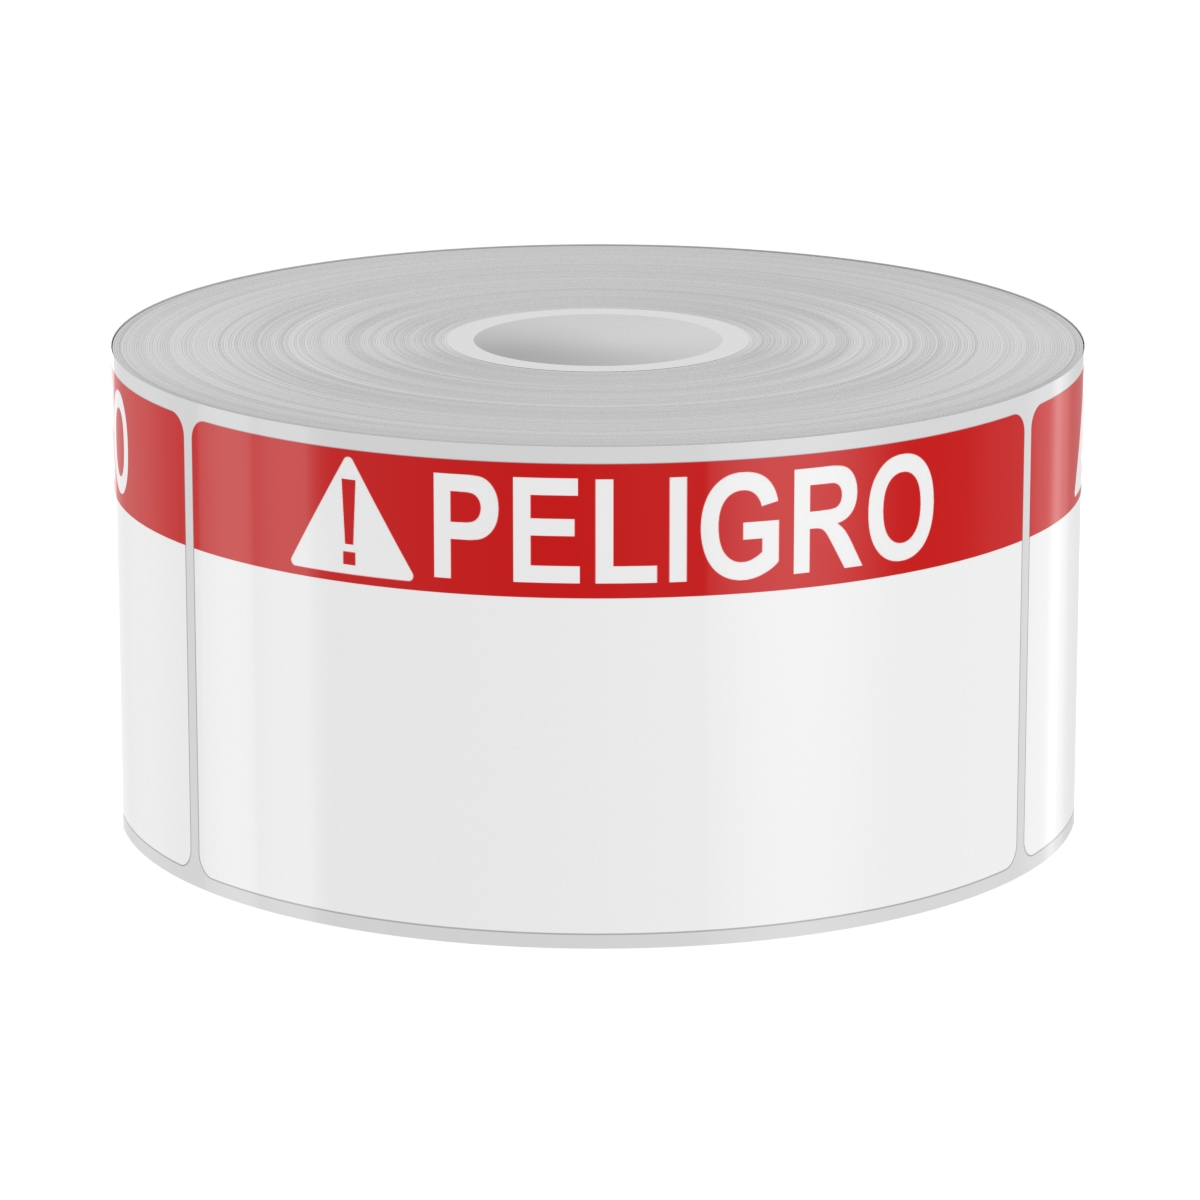 Ask a question about 250 2" x 4" Labels with Red PELIGRO Header